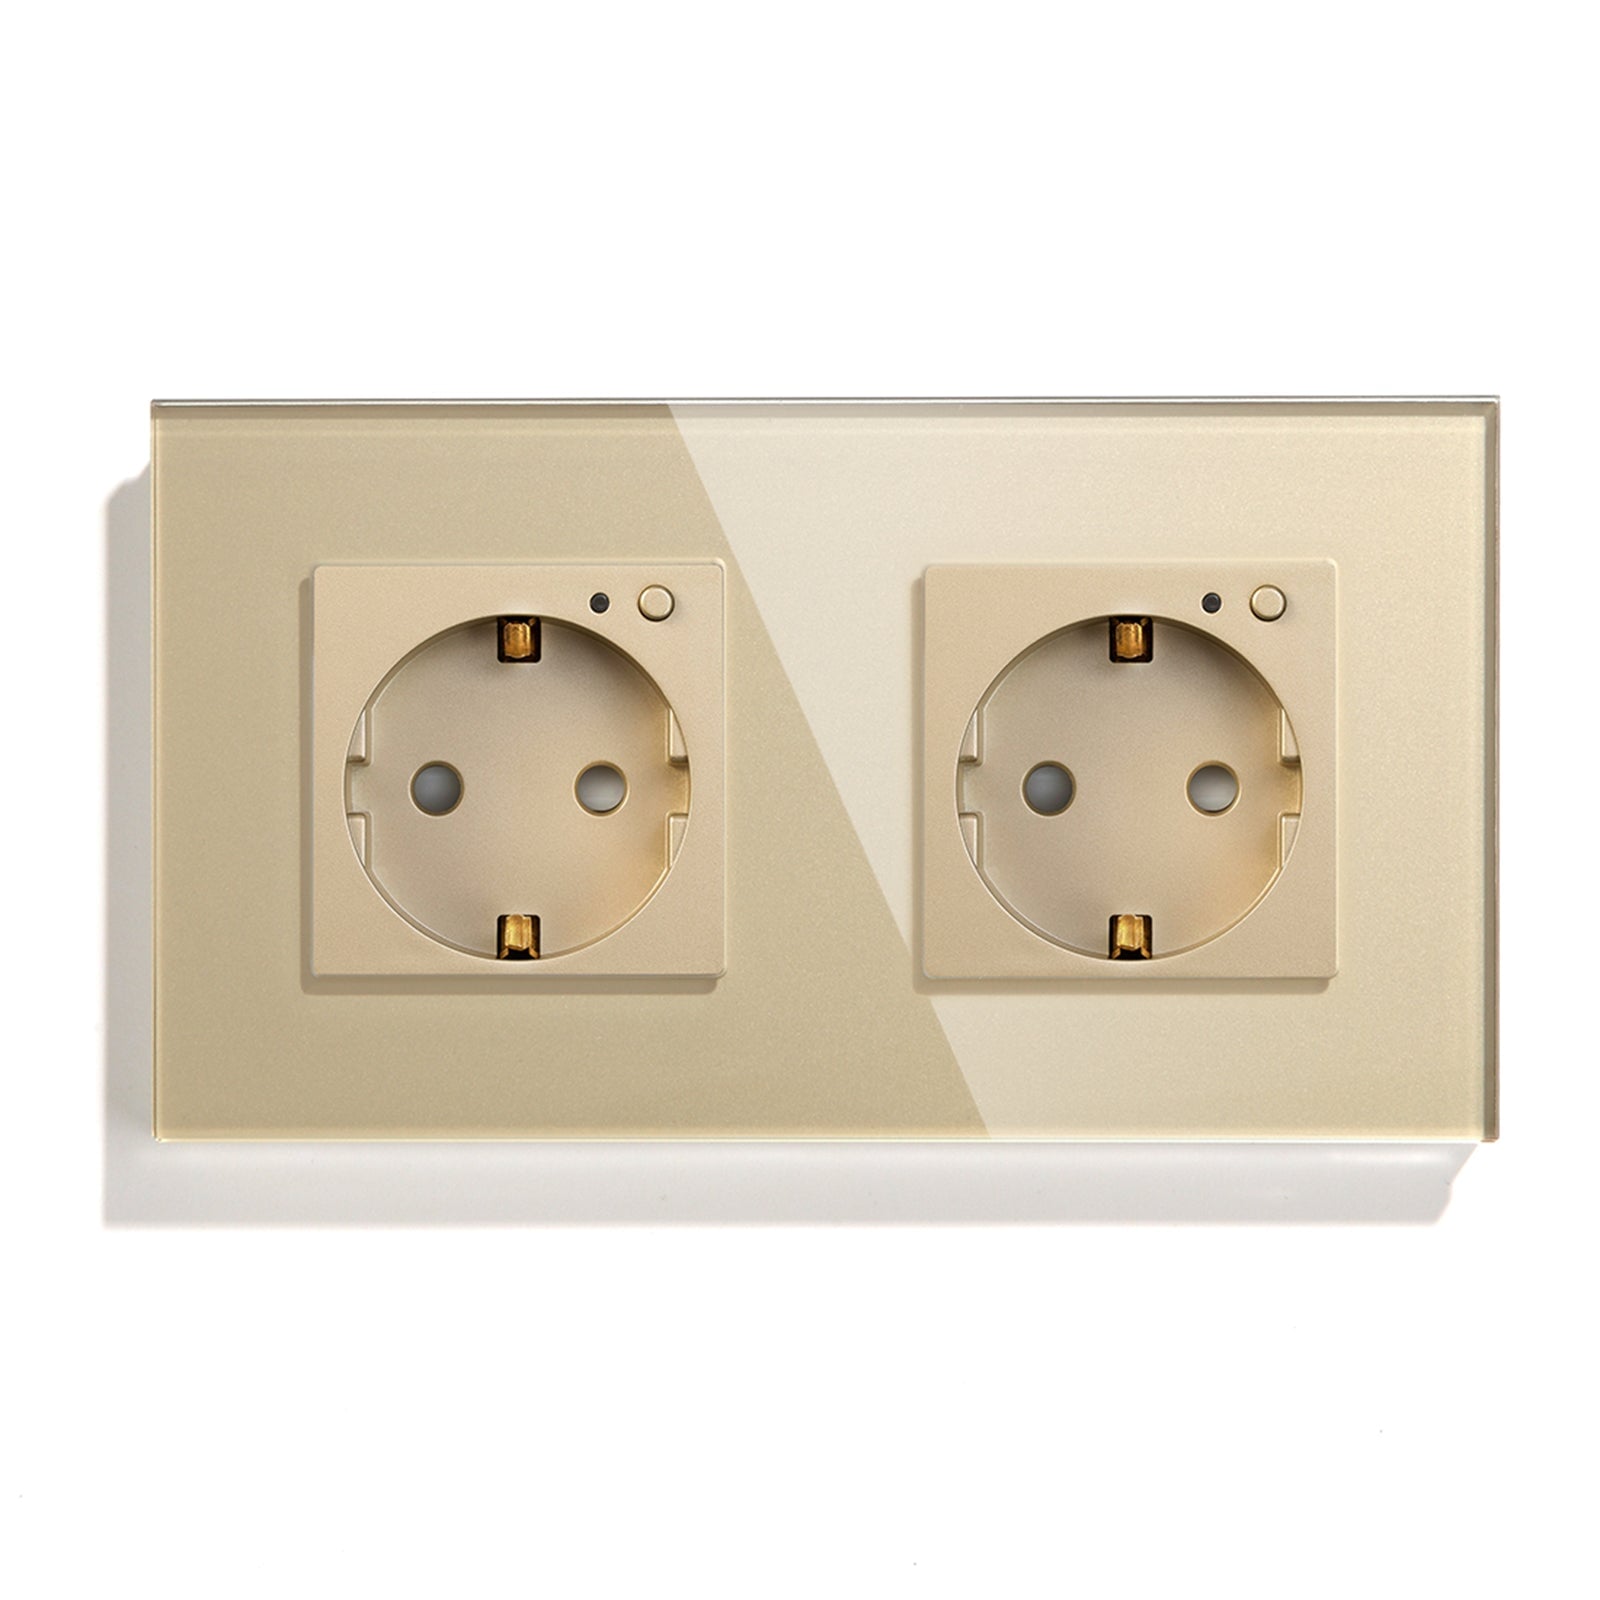 BSEED ZigBee EU Wall Sockets Power Outlets Kids Protection Wall Plates & Covers Bseedswitch golden Double 